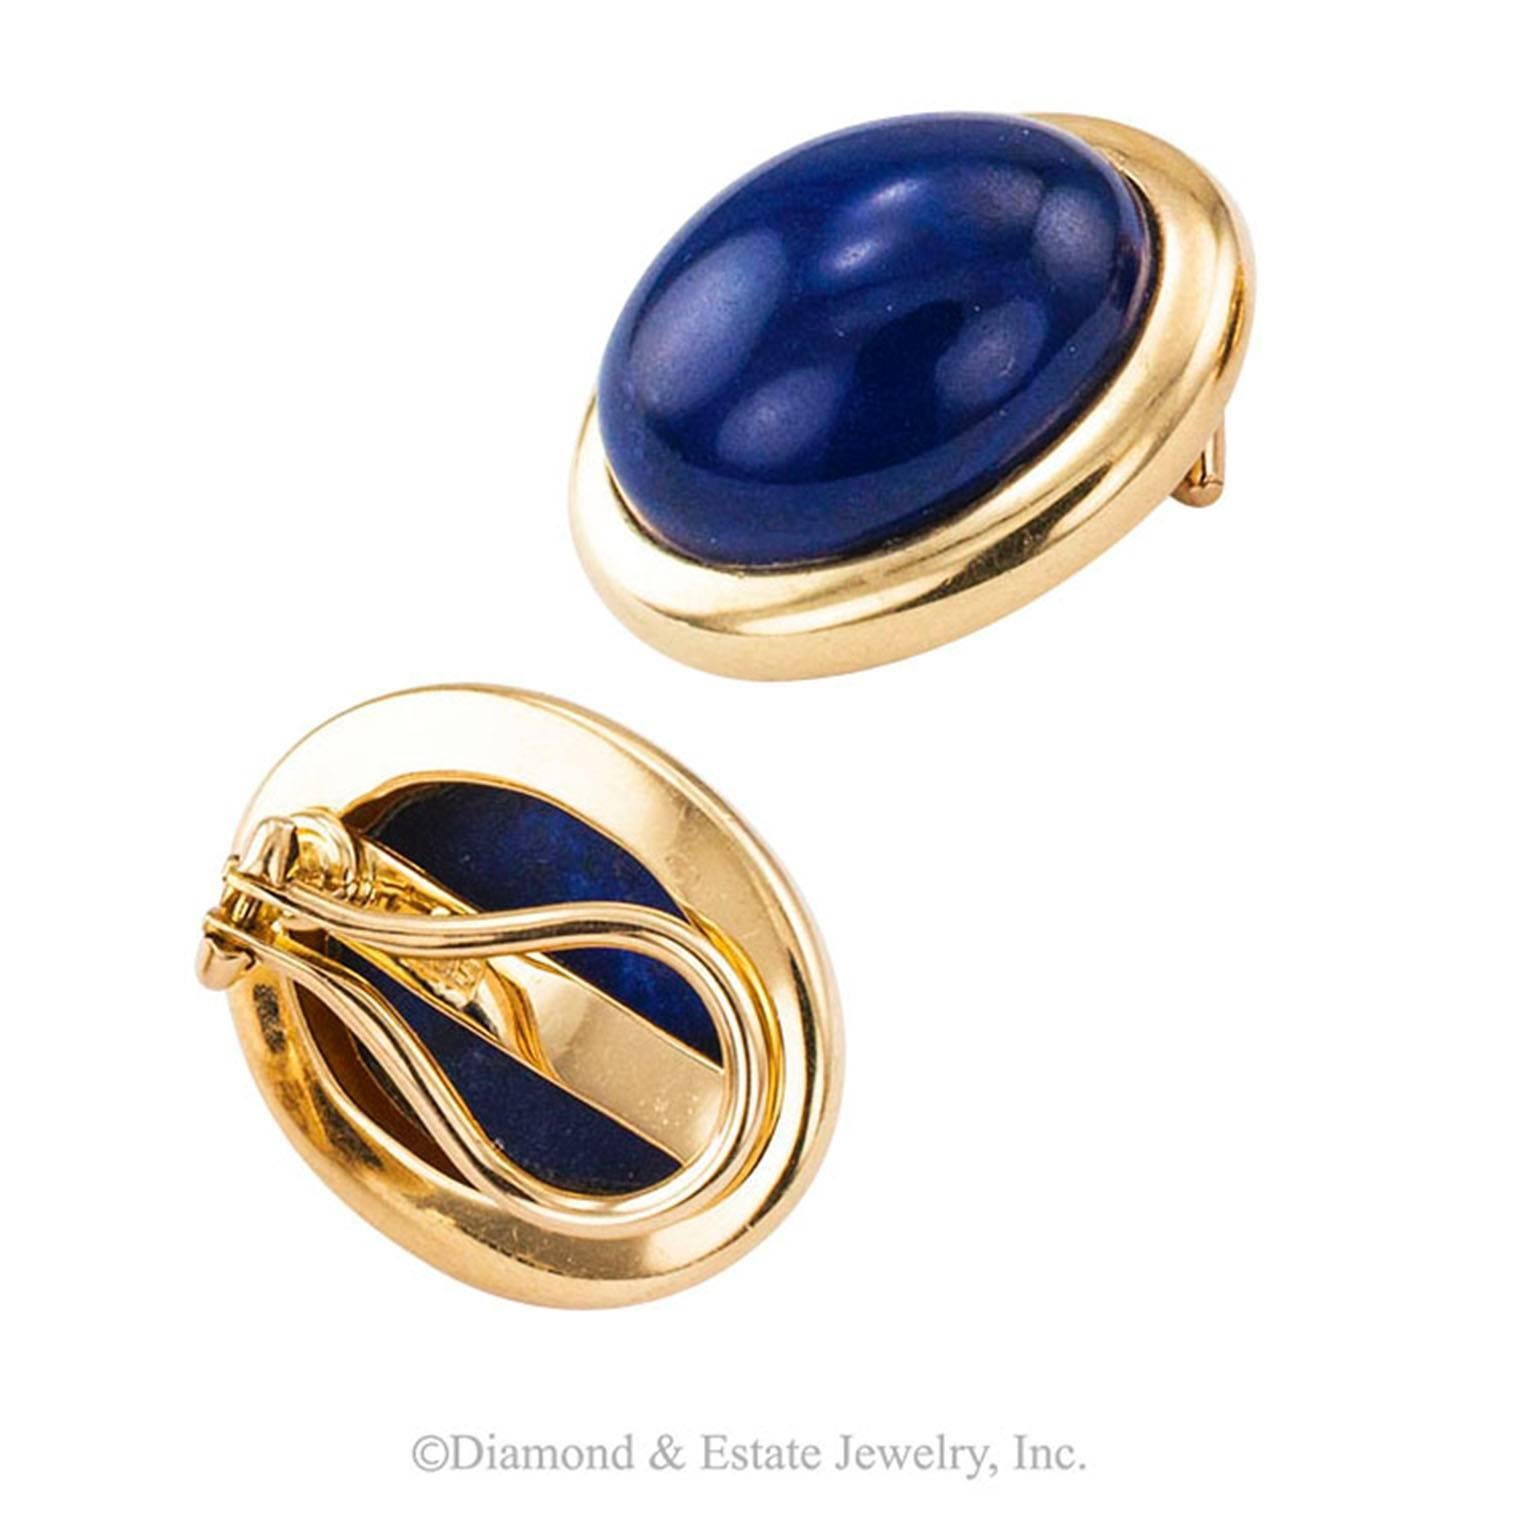 1970's Lapis Lazuli and Gold Button Ear Clips

Smart and practical lapis lazuli button ear clips.   A design that never goes out of style.  A beautiful cabochon set in a simple 14-karat yellow gold bezel. The color of fine lapis lazuli is a